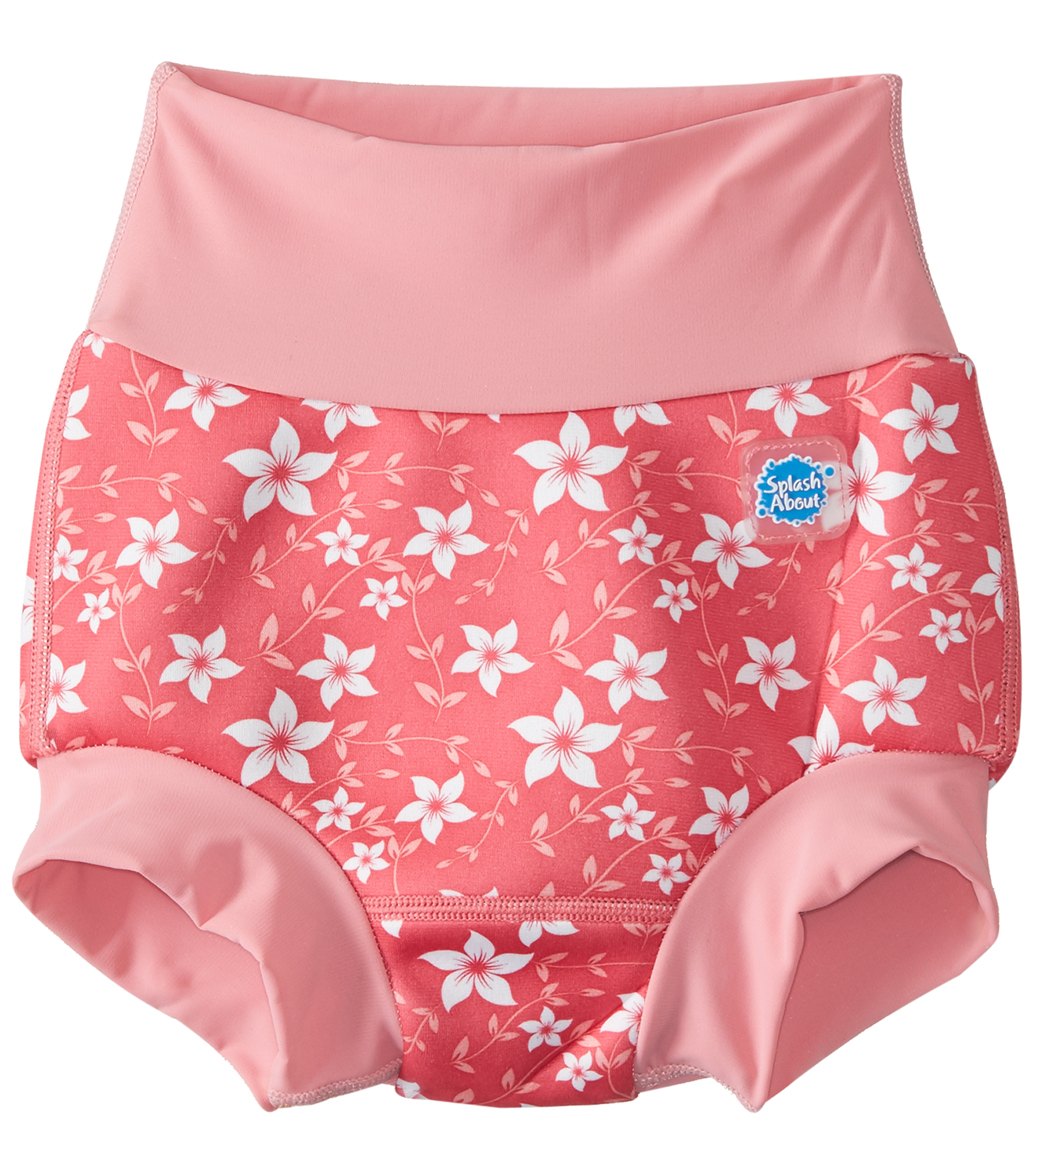 Splash About New Improved Happy Nappy Swim Diaper 3 Months-3T - Pink Blossom Medium 3-6 Months - Swimoutlet.com